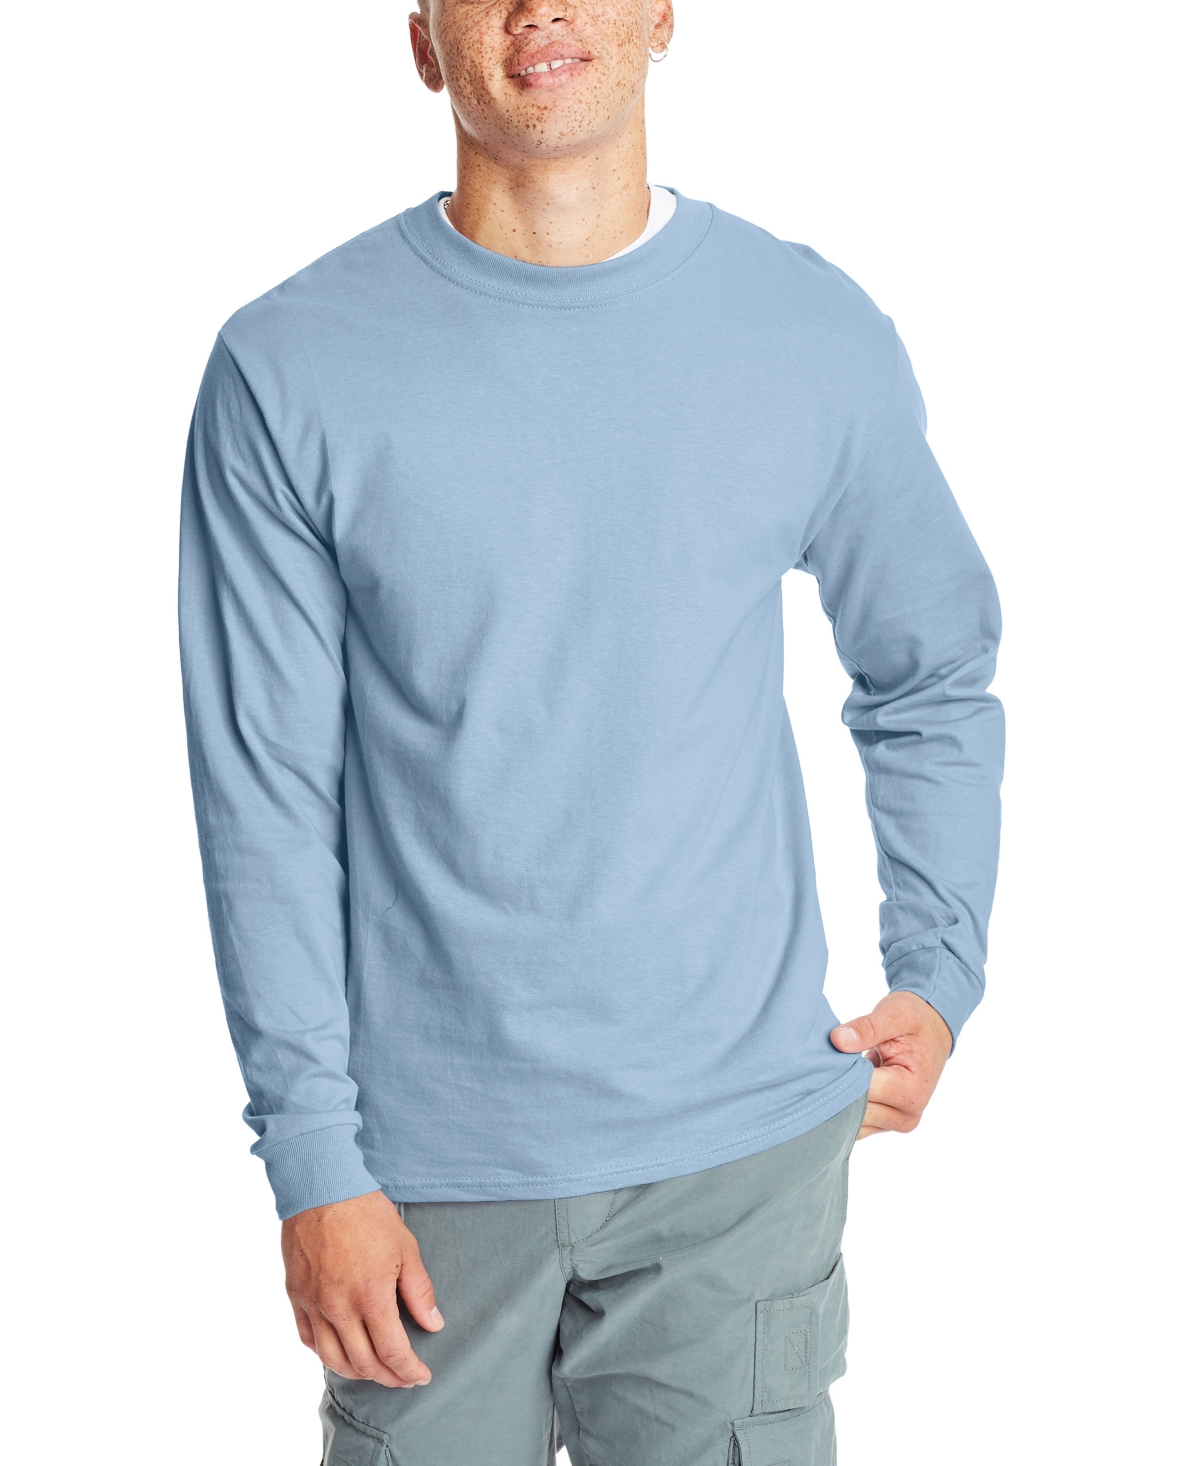 Hanes Beefy-t Unisex Long-sleeve T-shirt, 2-pack In Blue